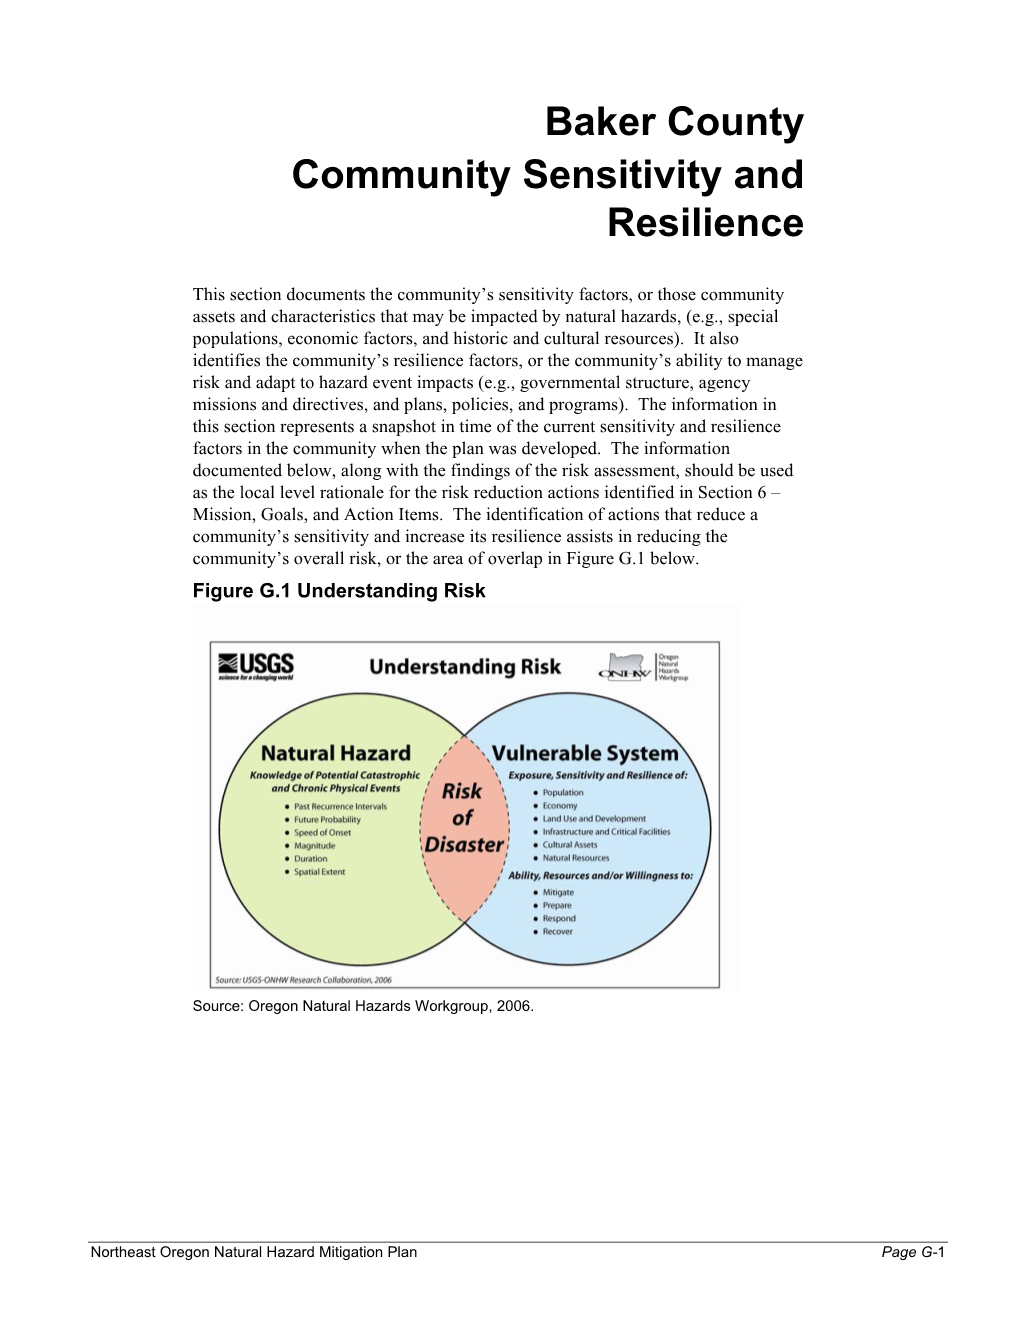 Baker County Community Sensitivity and Resilience